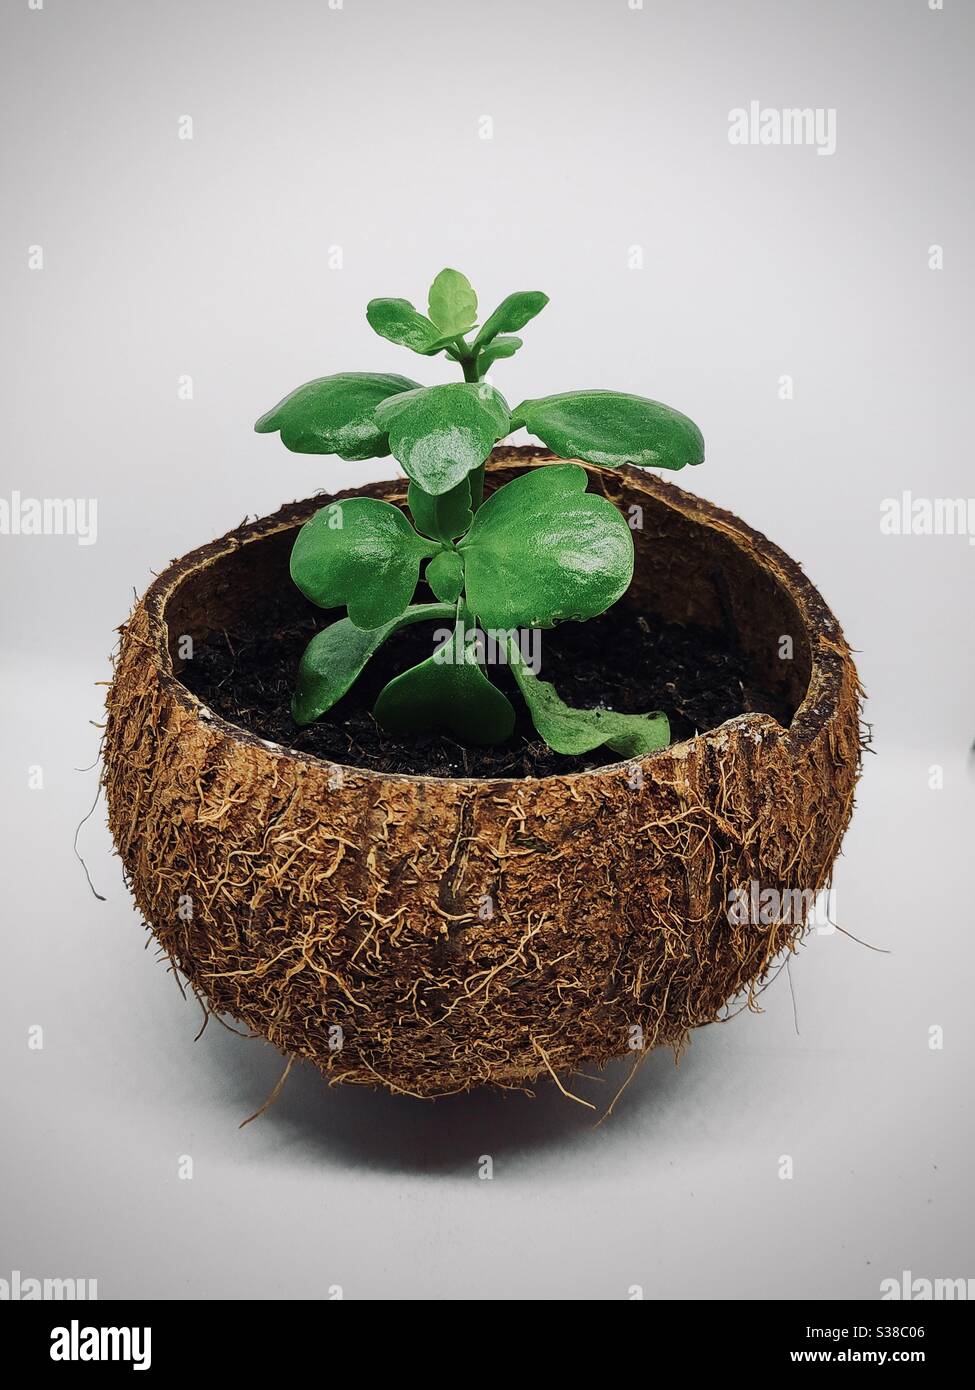 Sustainable and environment friendly planting Stock Photo